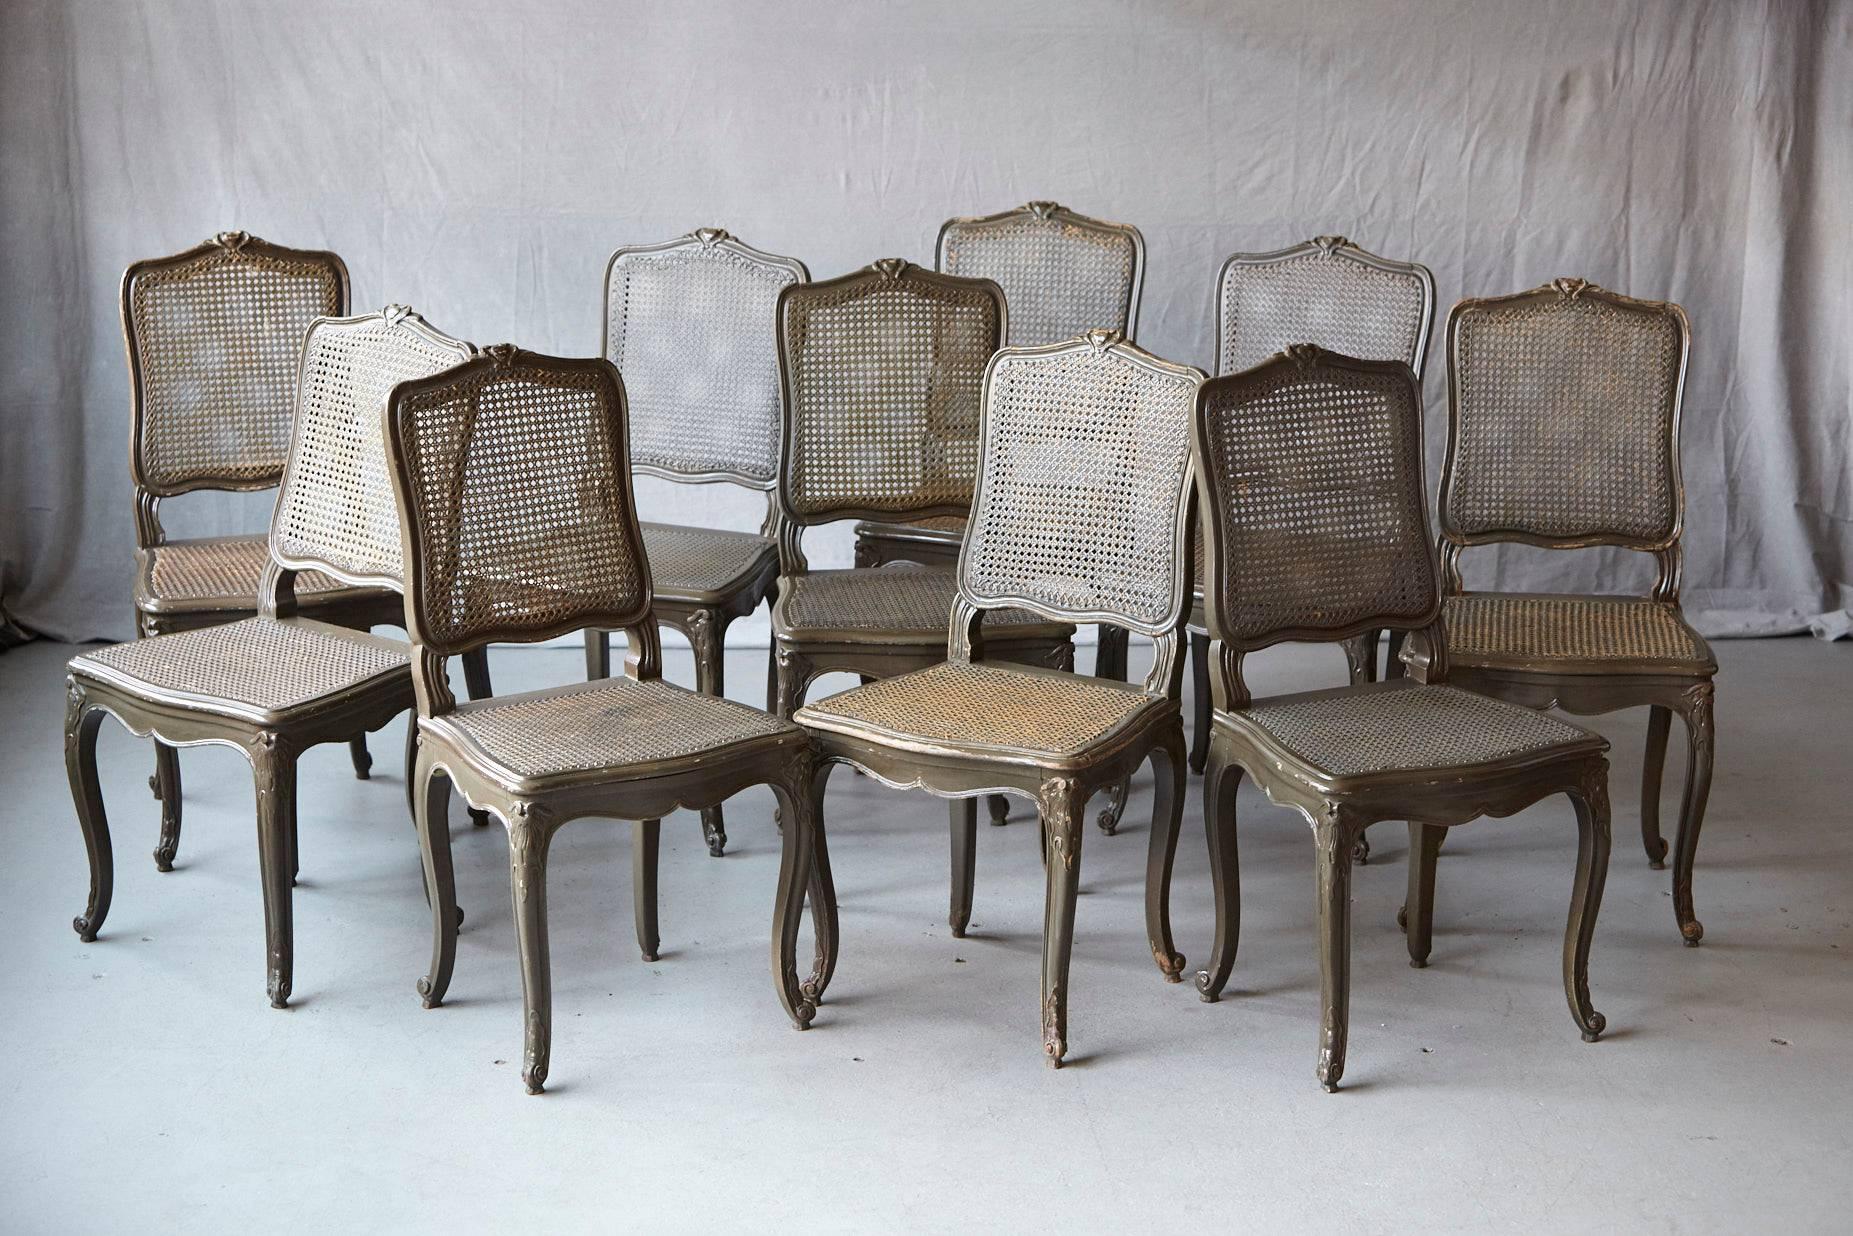 Set of ten early 20th century French Provençal country style dining chairs with caned backs and seats in hunting green paint finish. Raised on cabriole legs with carved knee mounts. All caned seats have a wood support for the sitting surface.
The